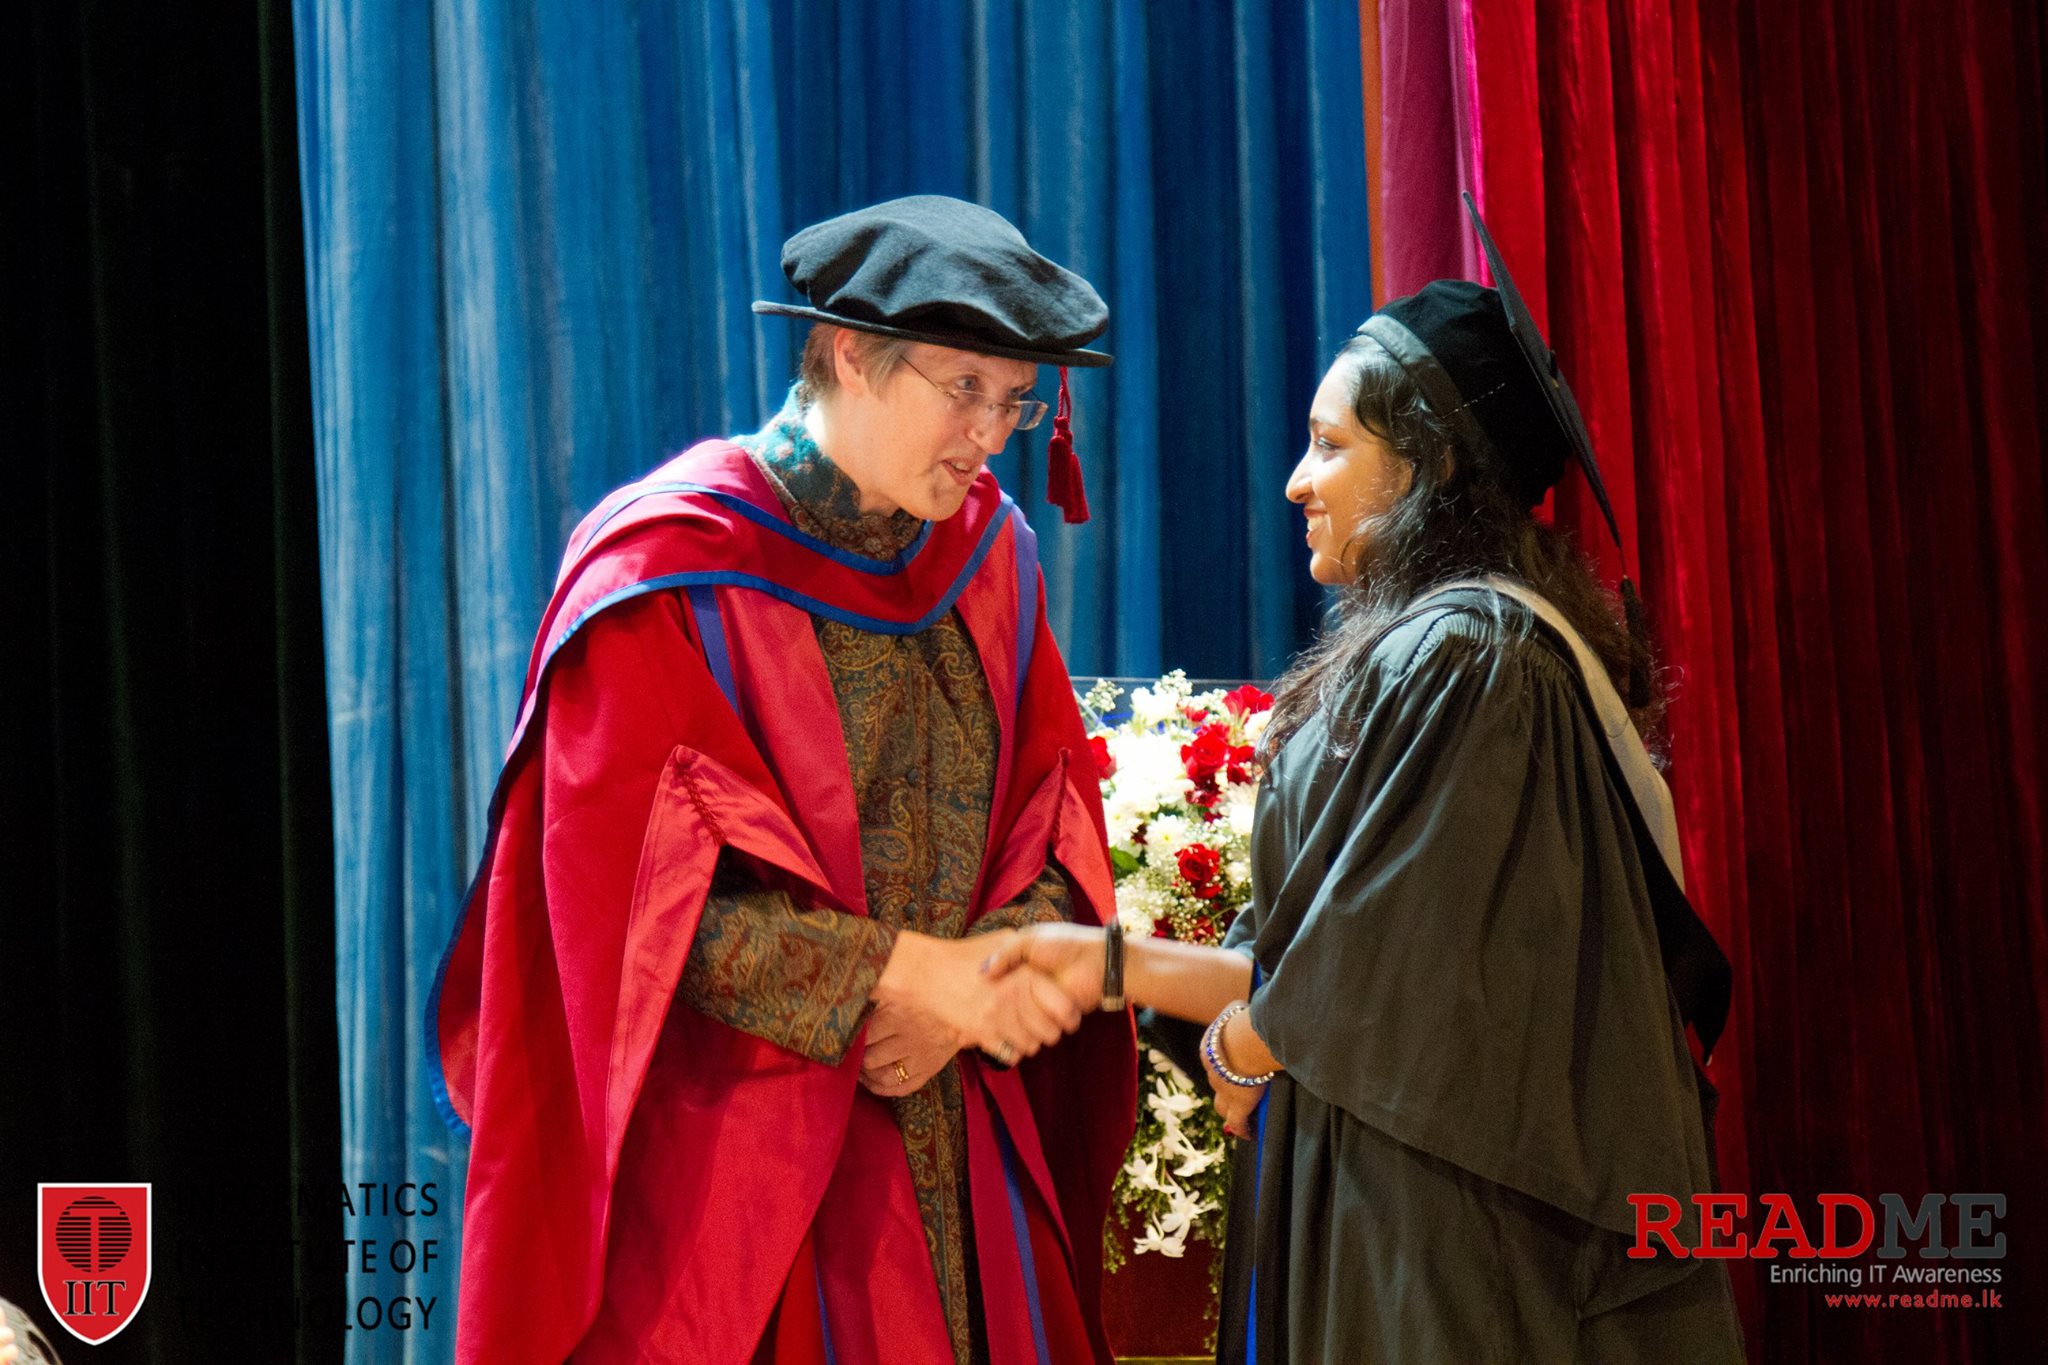 Receiving University of Westminster Best All-round Student Award (2015)